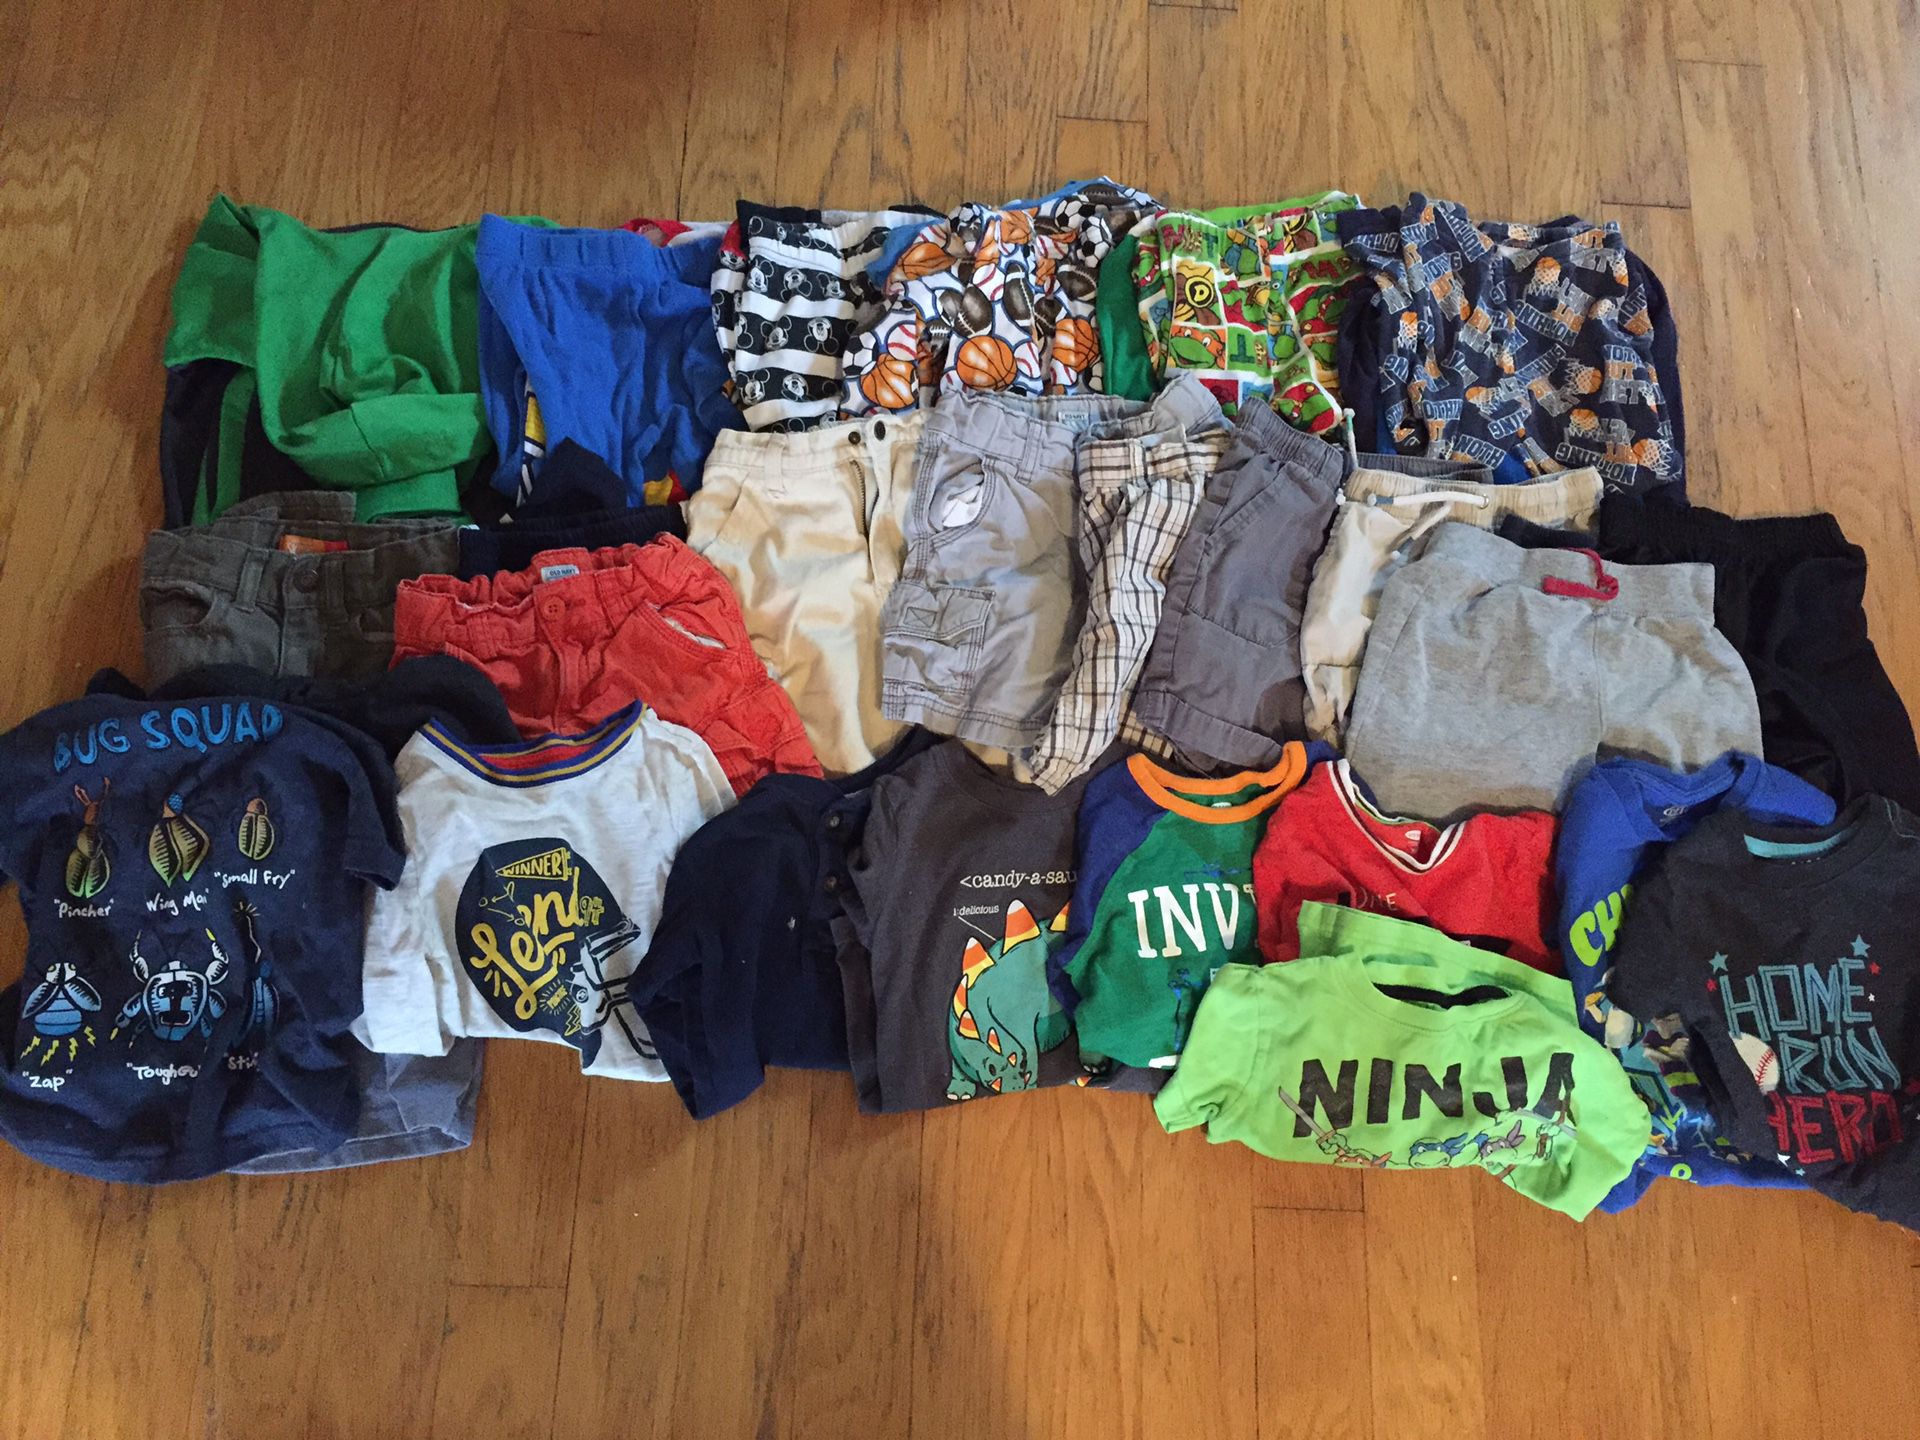 Boys 3T Clothing Collection! 33 Pieces of Clothing! Shirts, Shorts, Pants, PJs, Warm Ups!